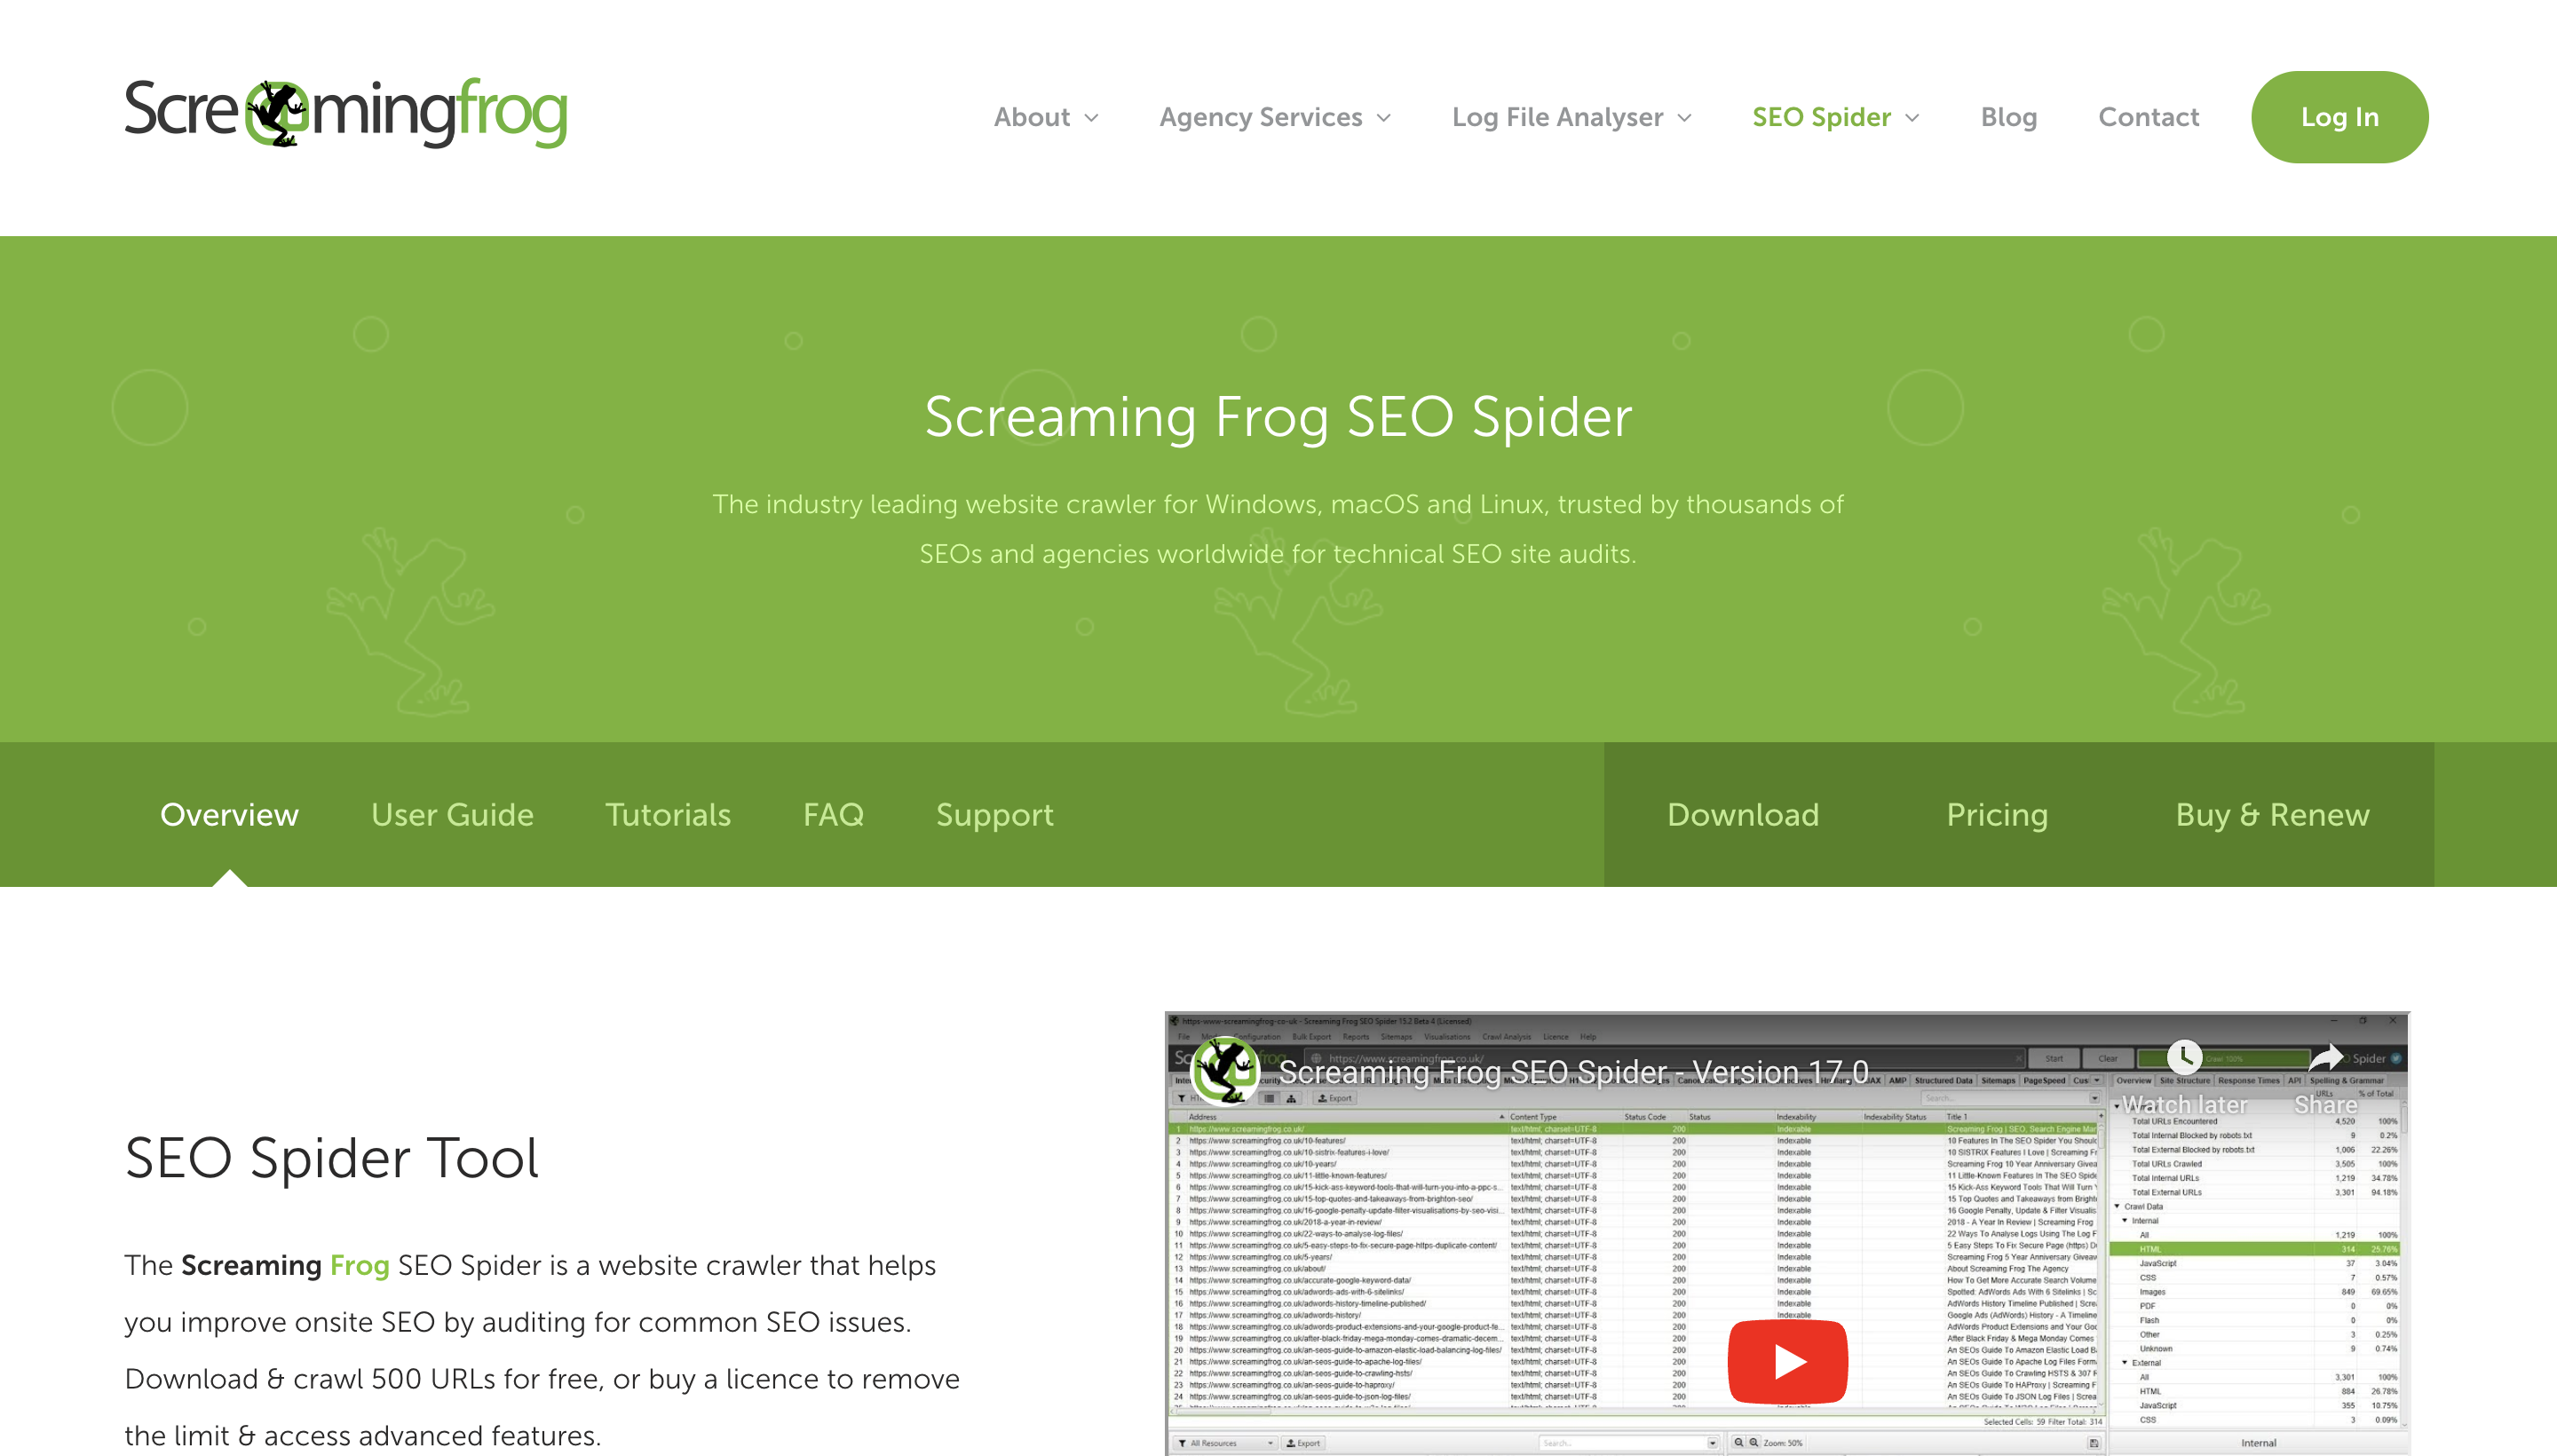 Screaming Frog Home Page